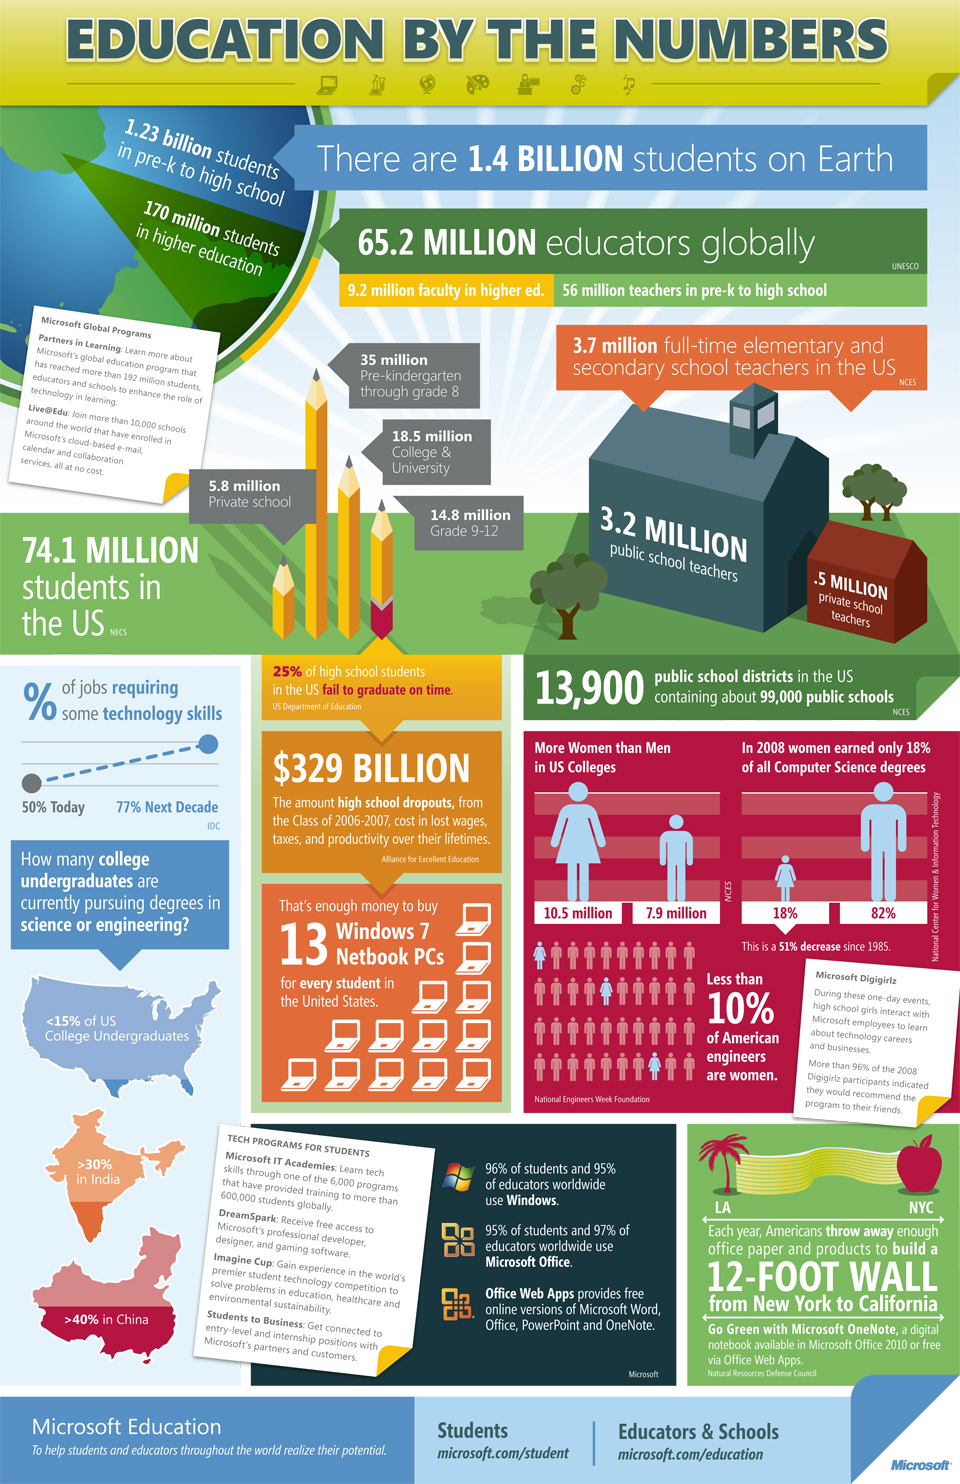 education-by-the-numbers_50290a5a38fa9